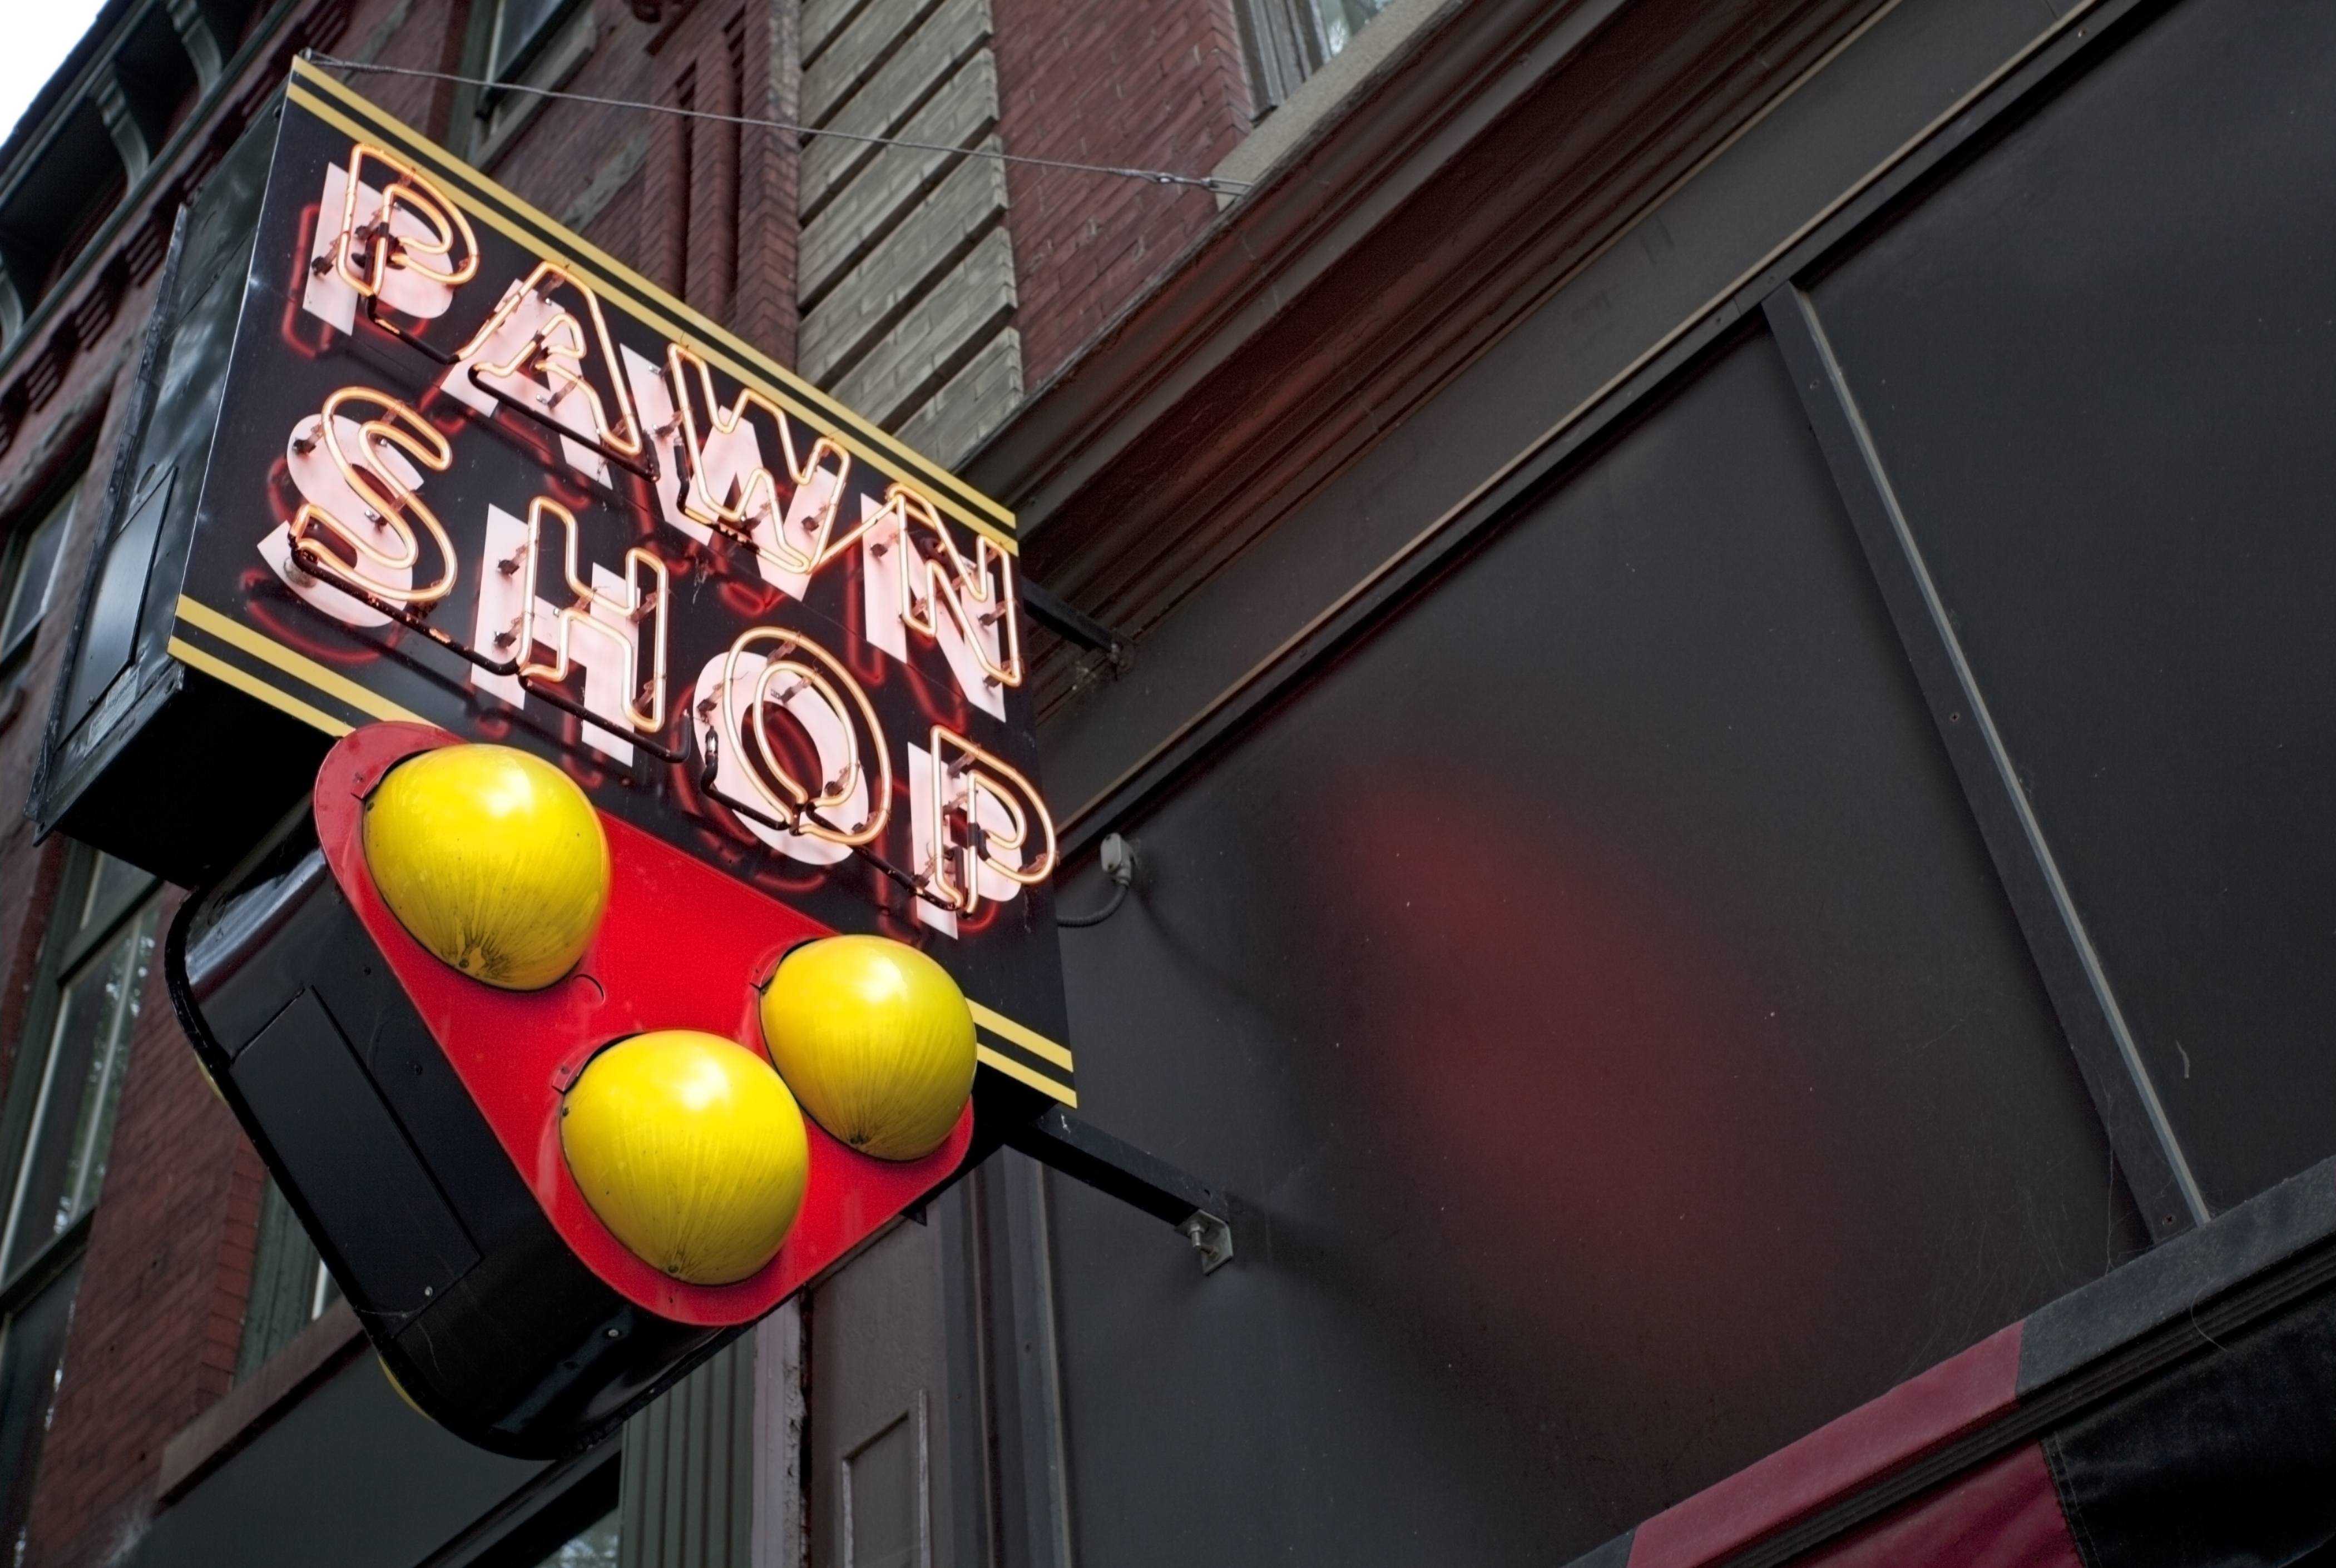 neon pawn shop sign